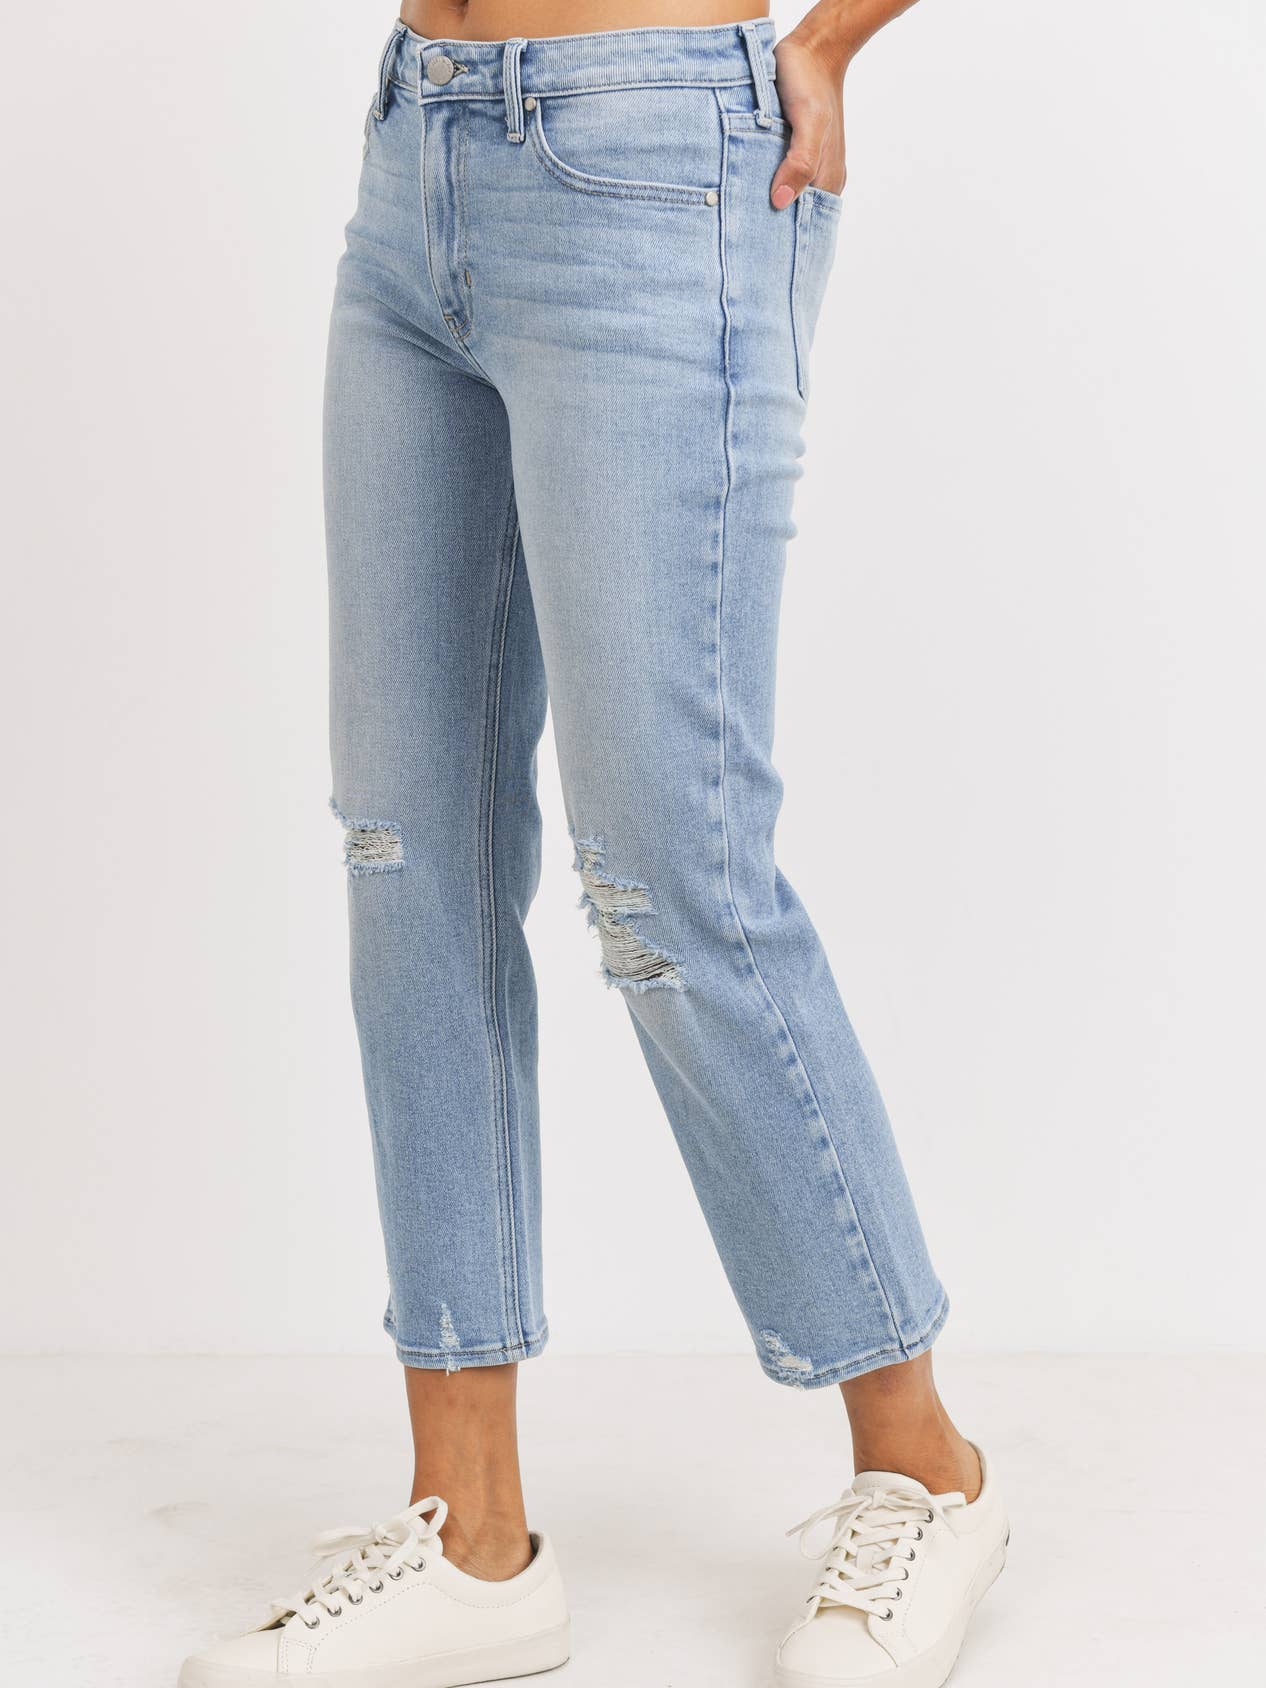 The Official Weekend Jean